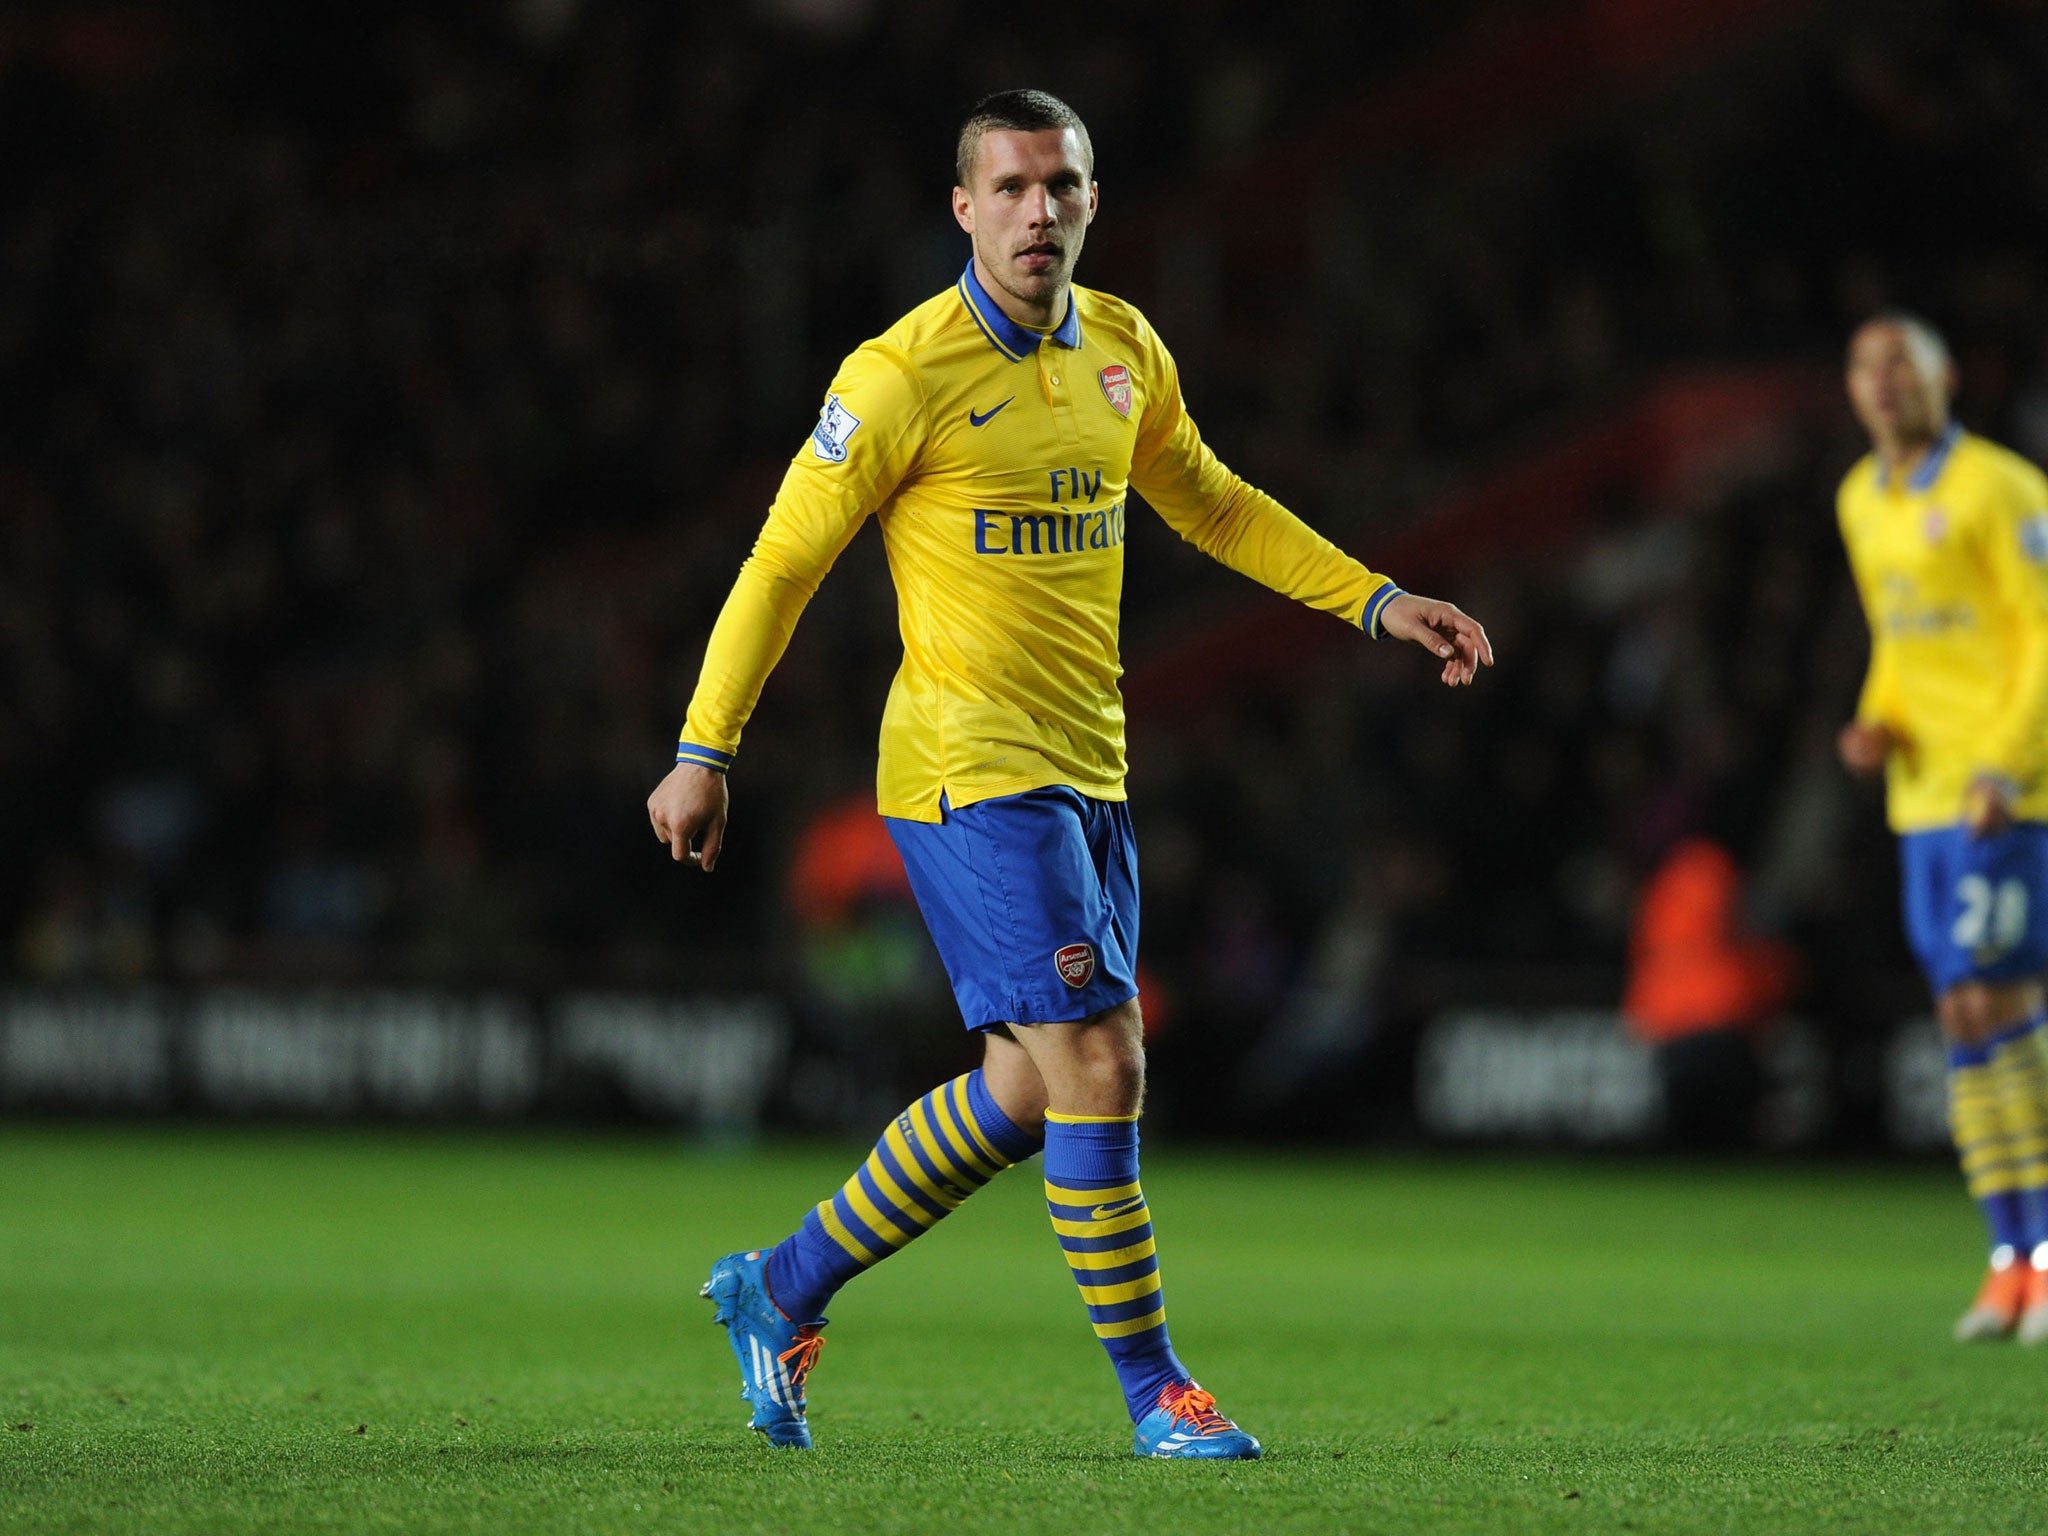 Lukas Podolski has admitted that he shouldn't have left Bayern Munich so early back in 2009